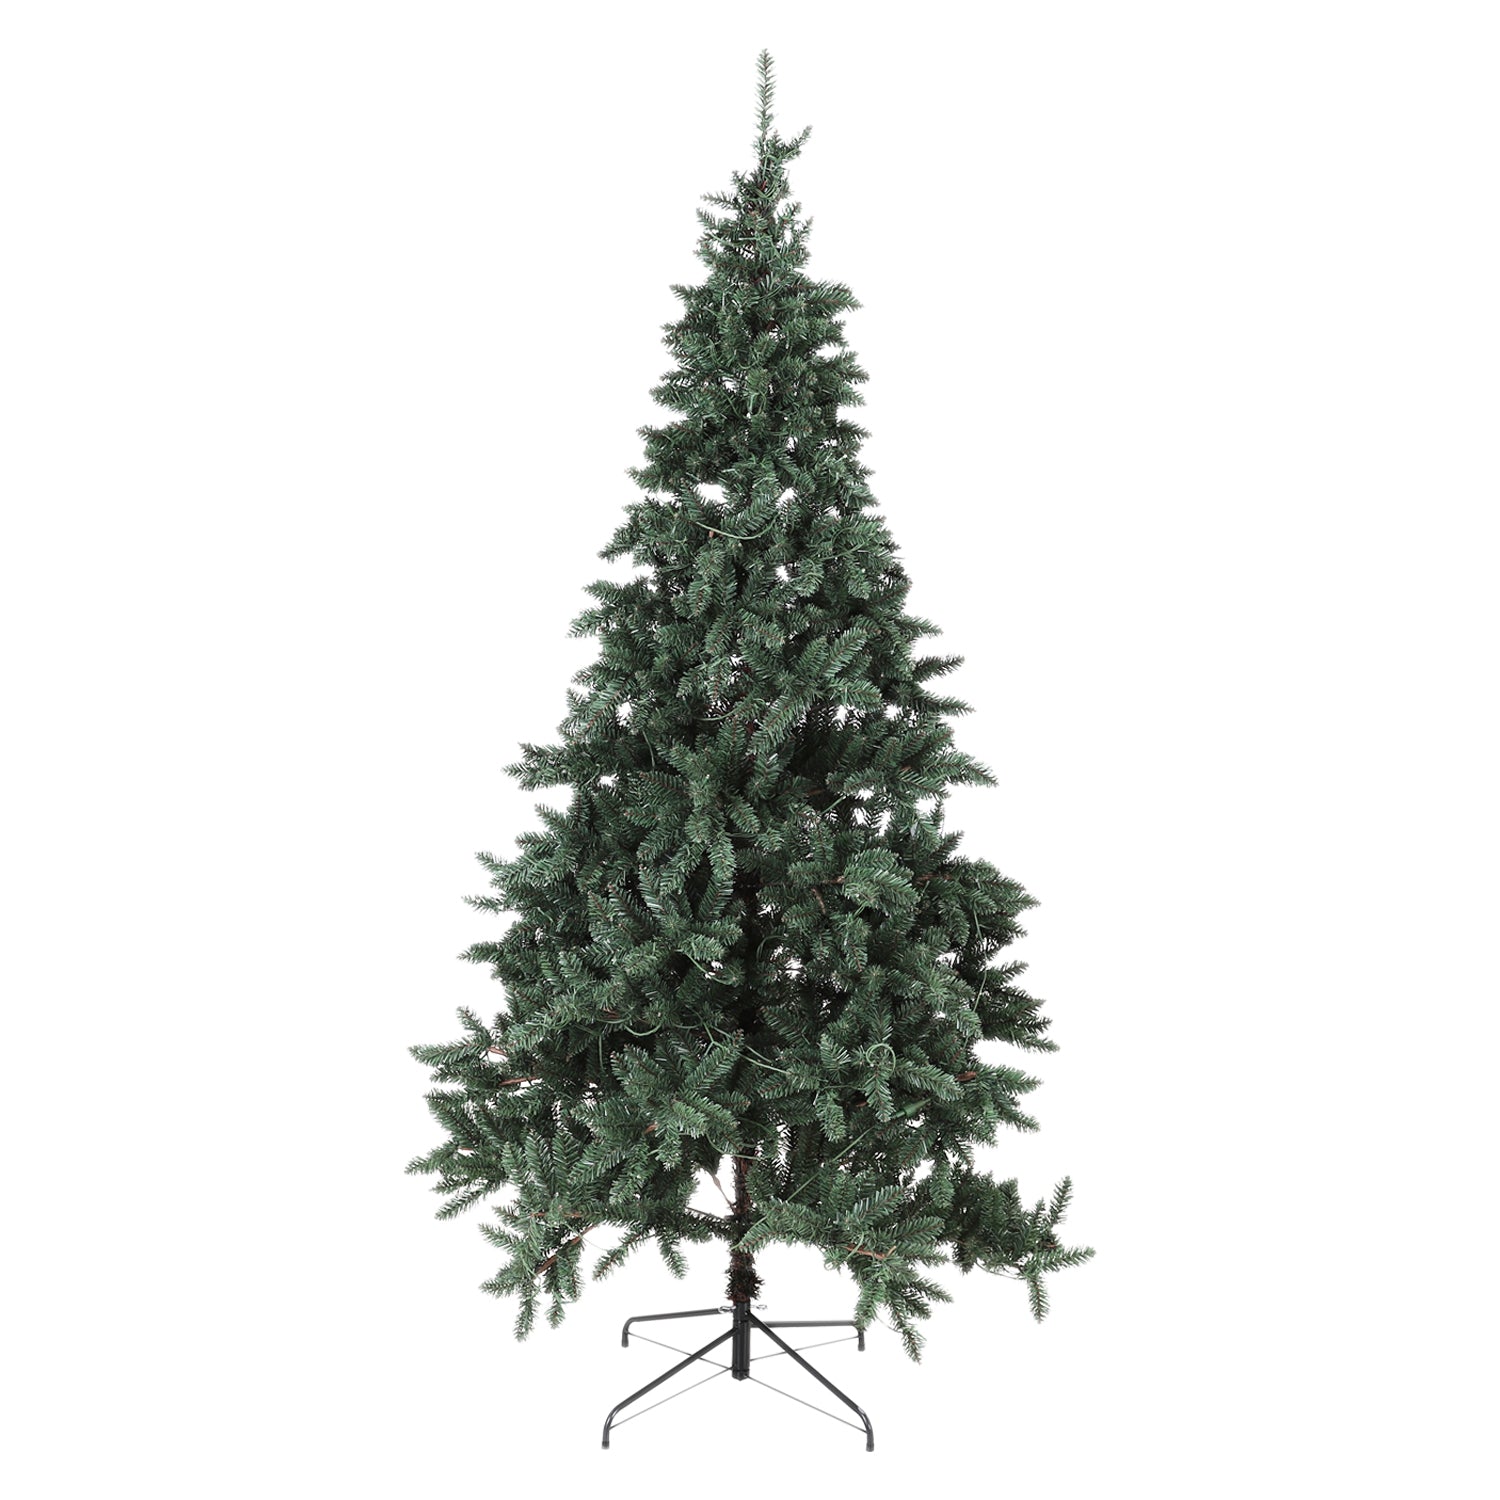 PHI VILLA 9ft Artificial Christmas Tree with Metal Stand, 100% PVC Material for Home, Office, Party Decoration